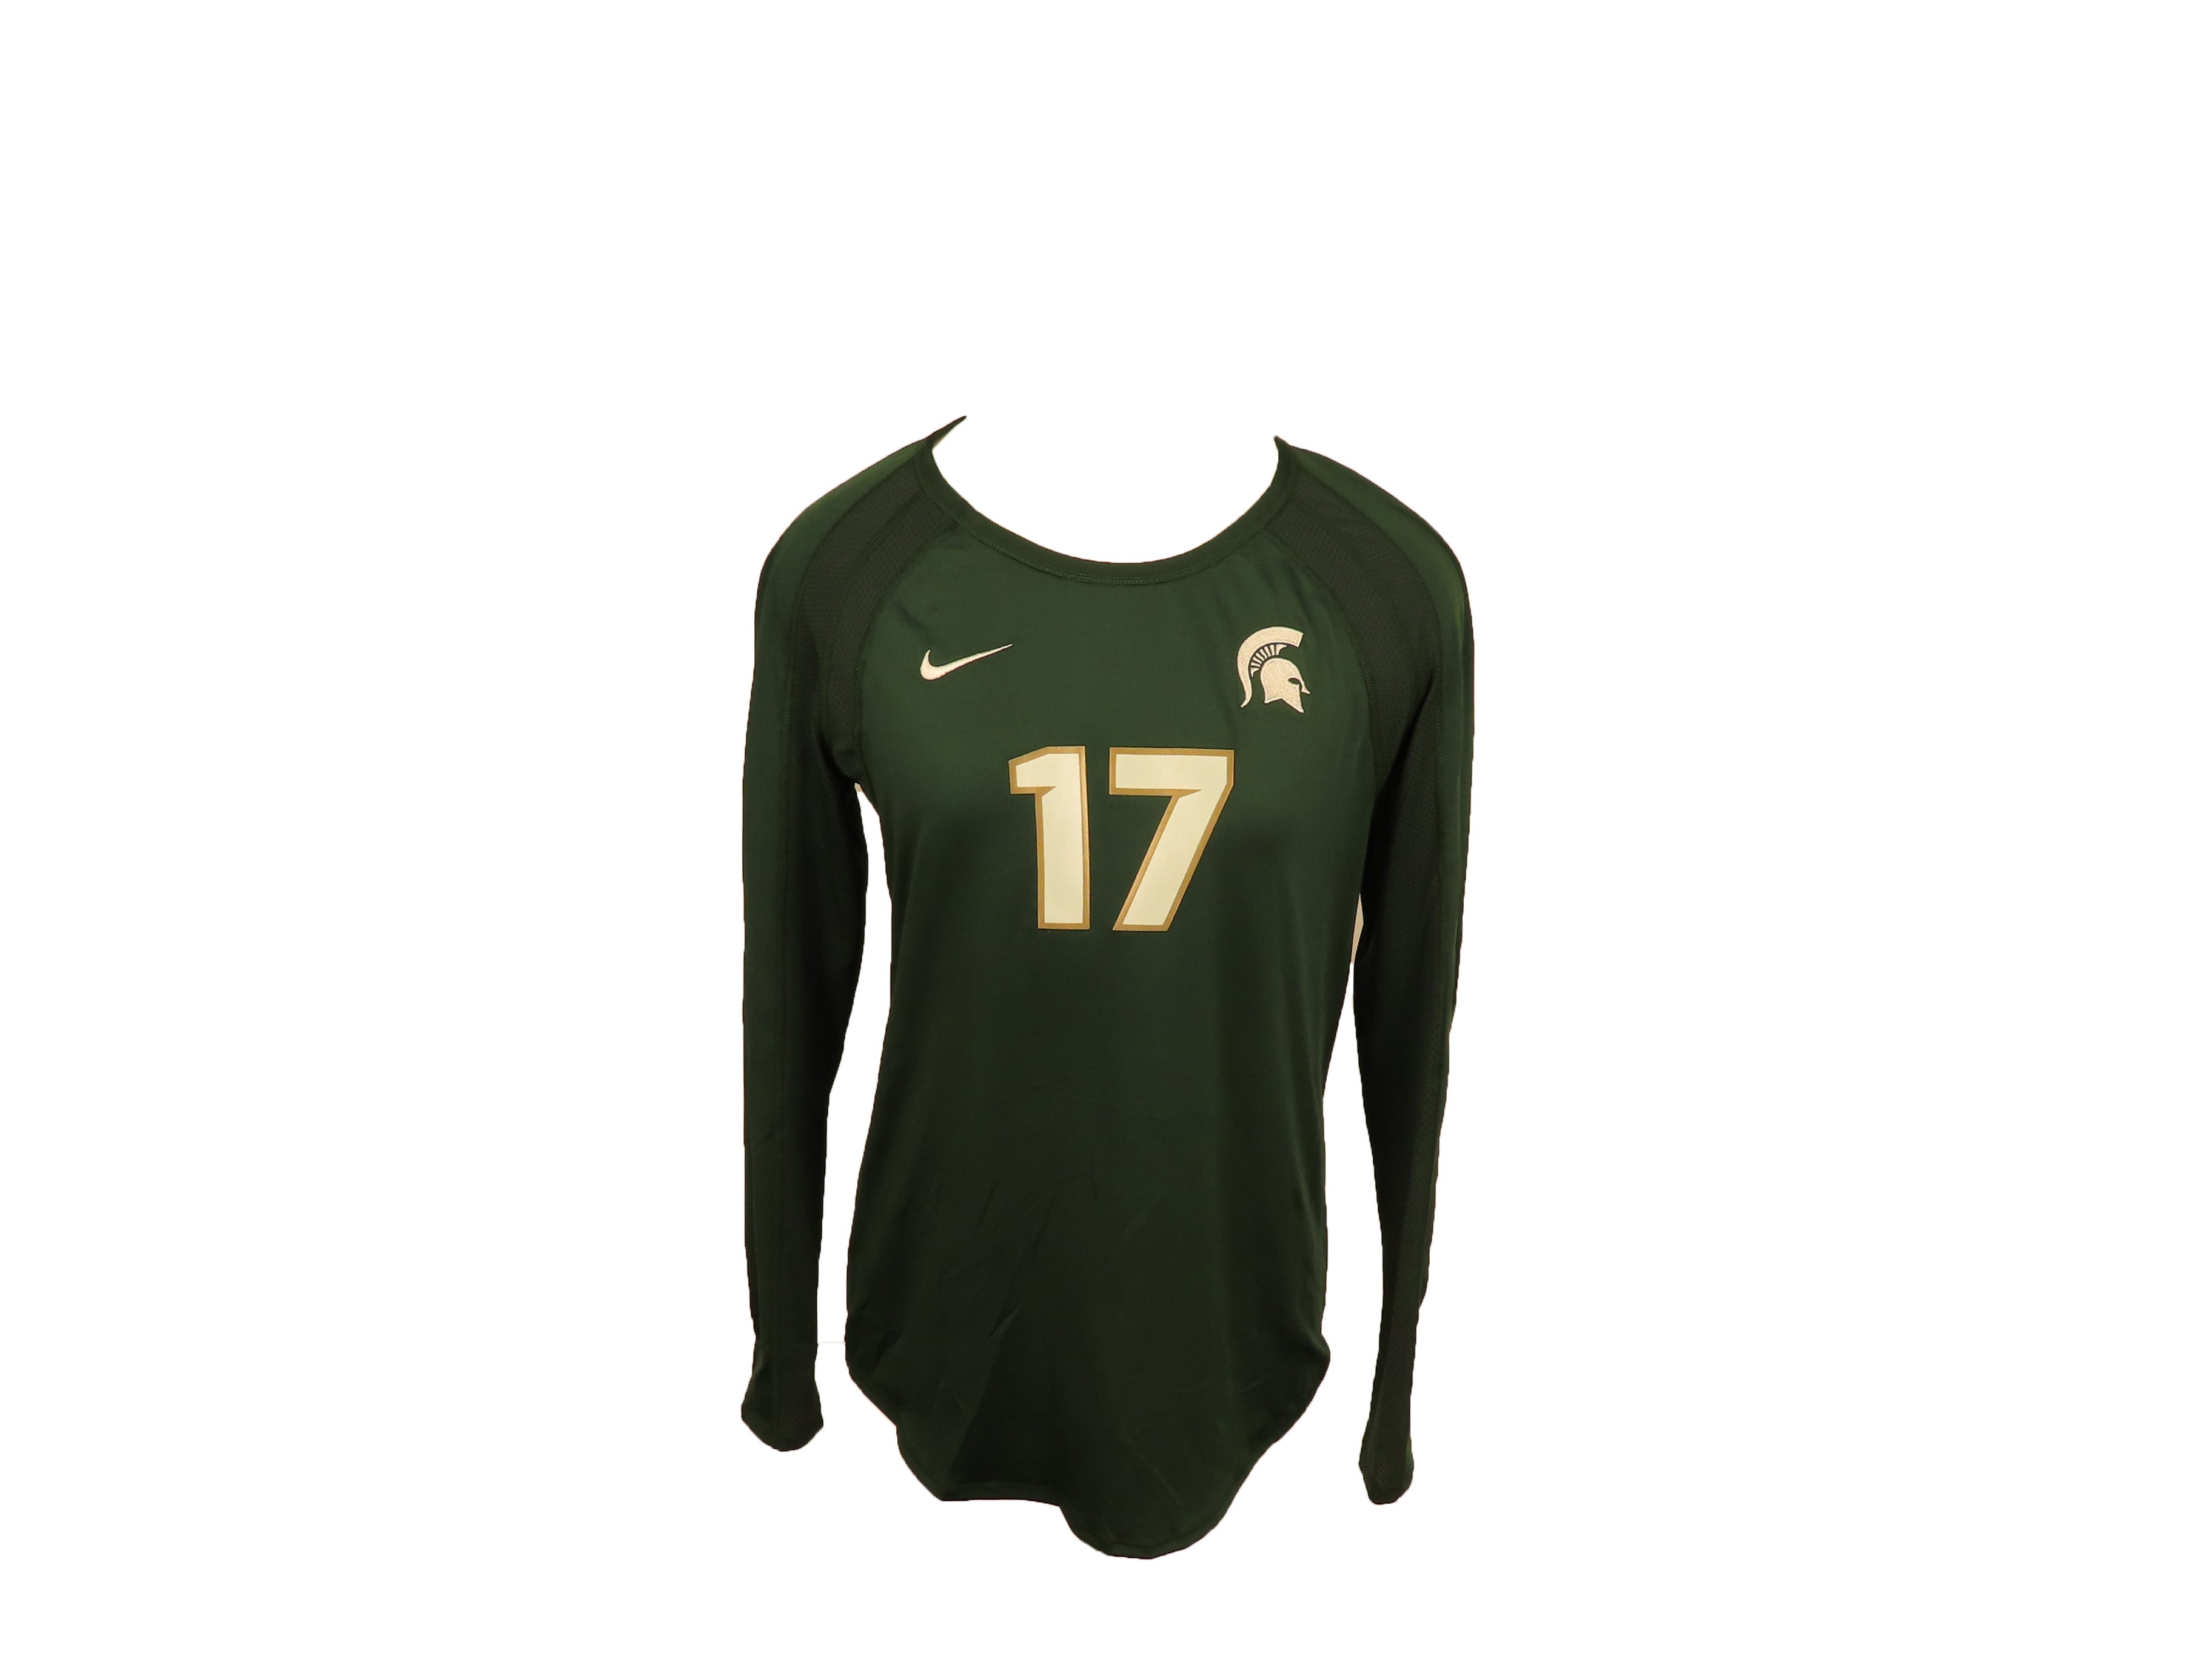 women's fitted football jersey